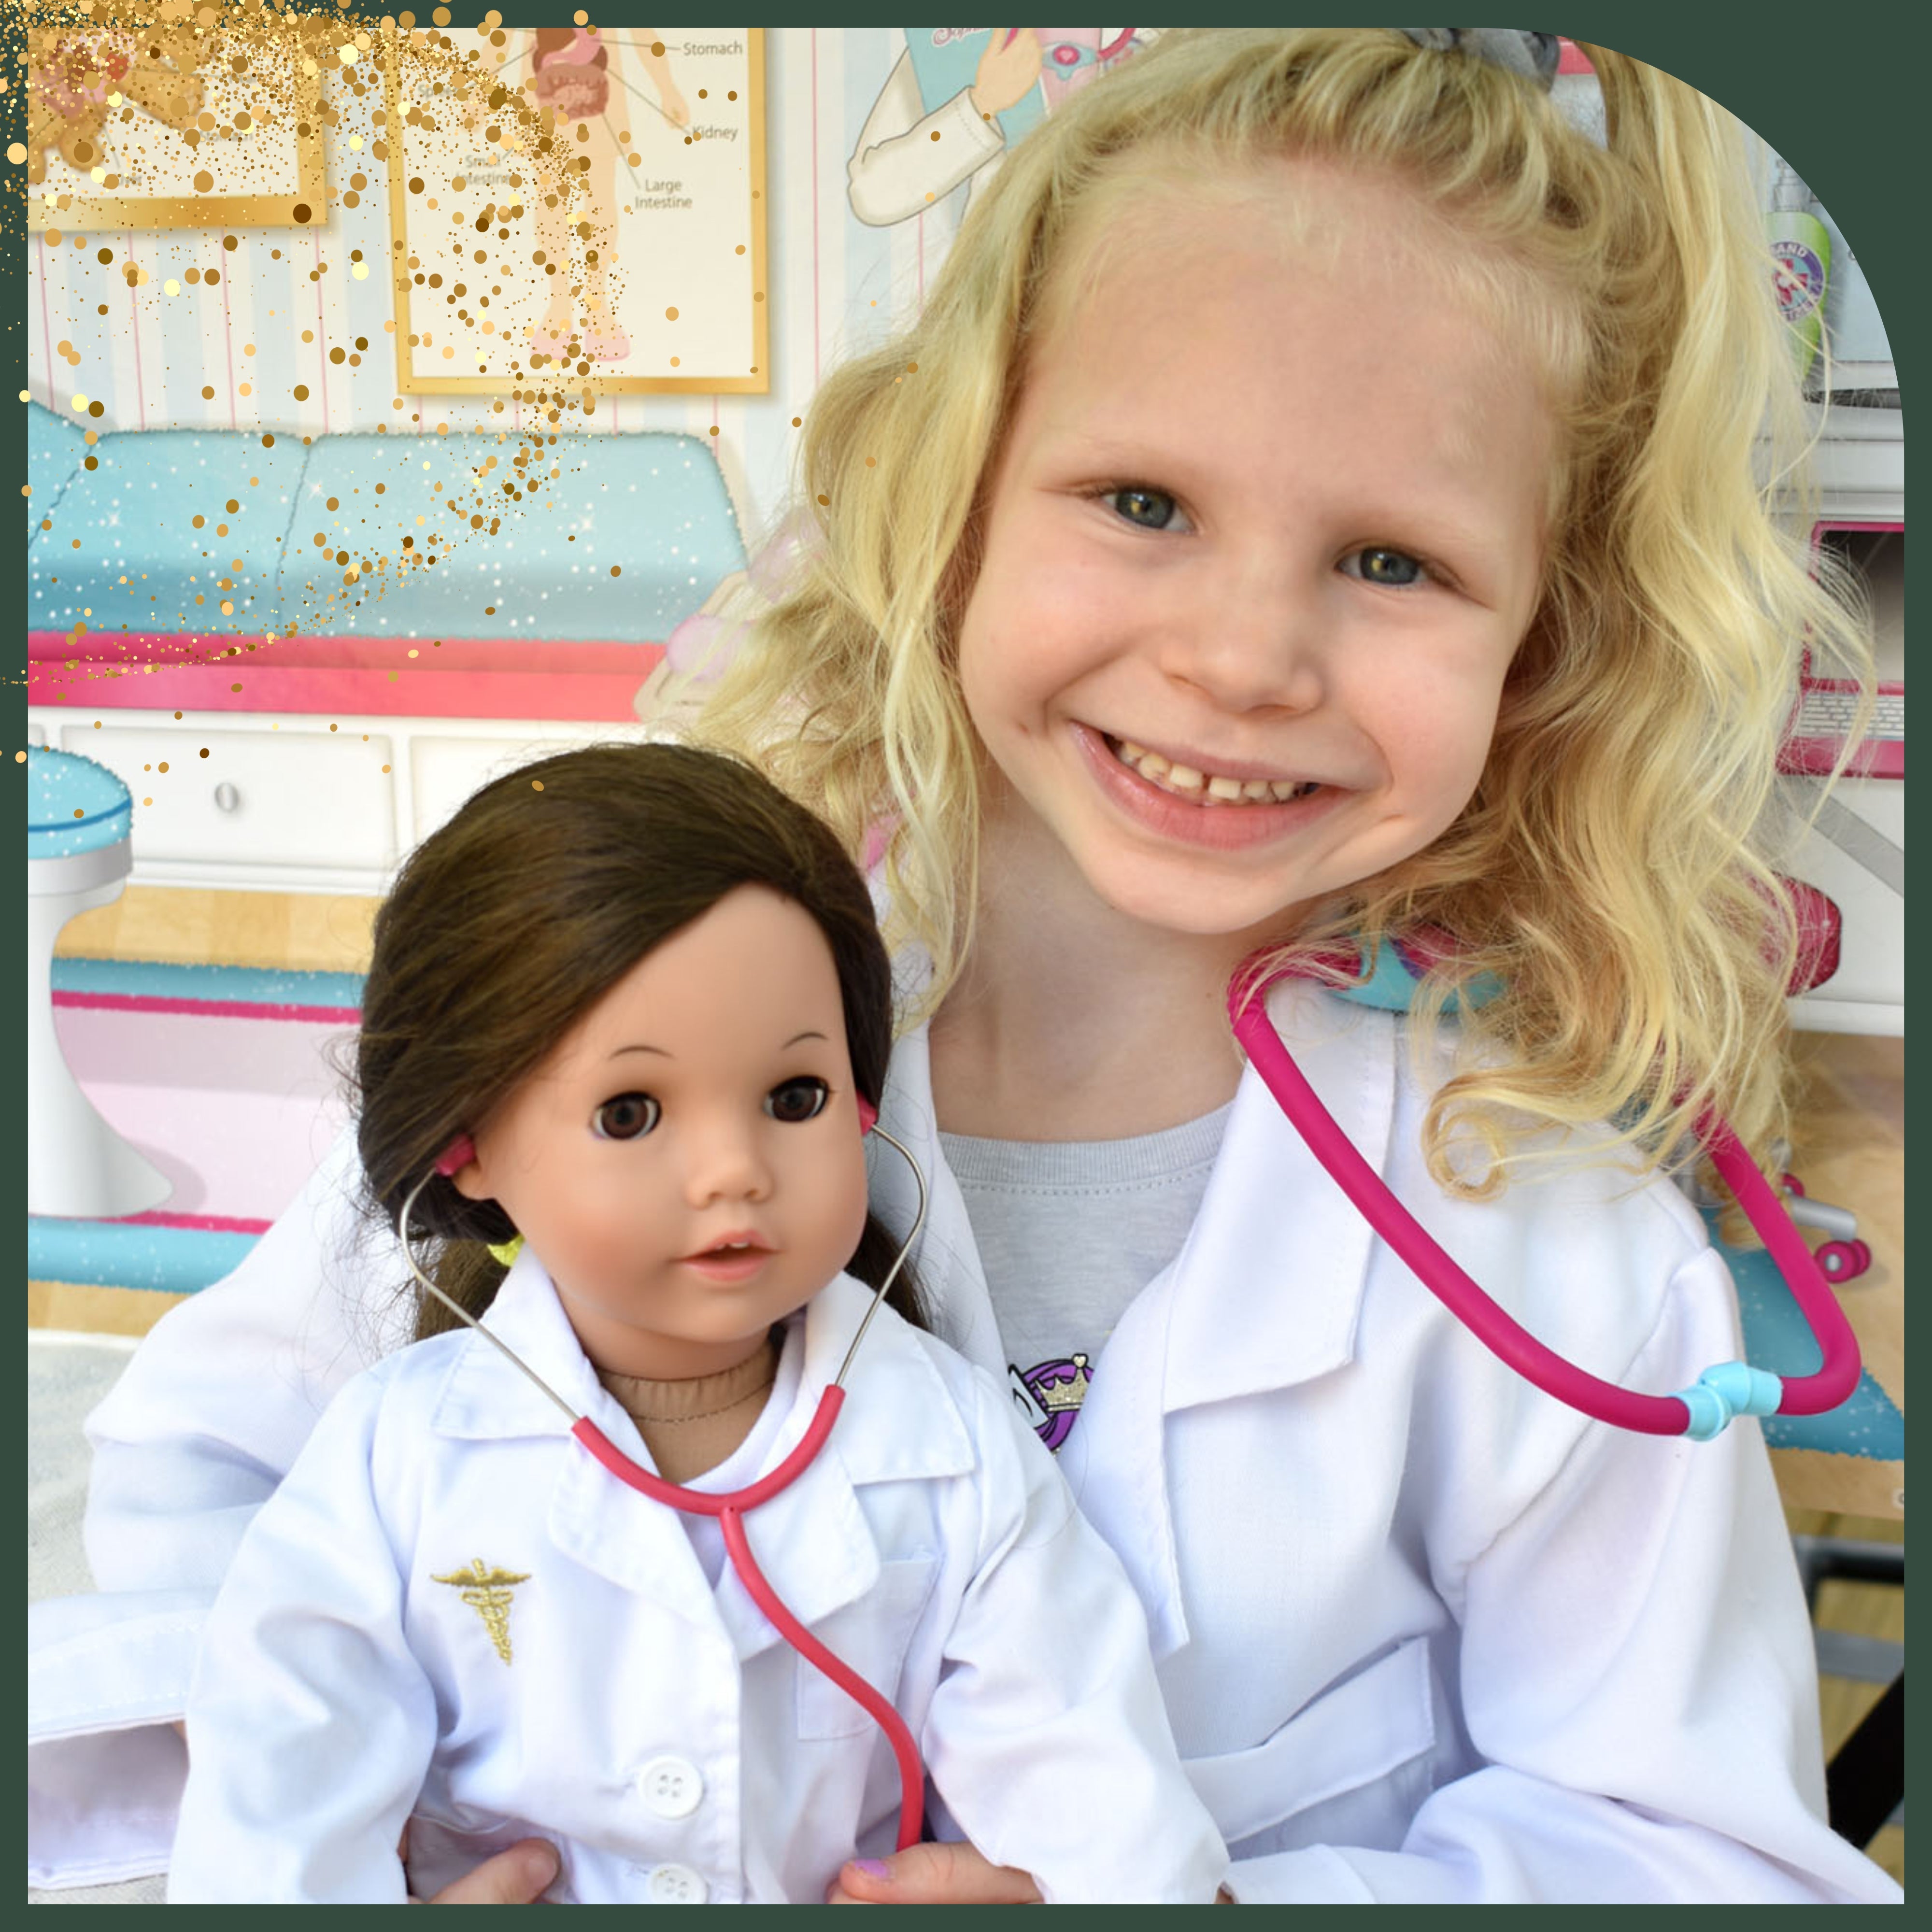 a smiling young girl and her doll are dressed as matching doctors with lab coats and stethoscopes 